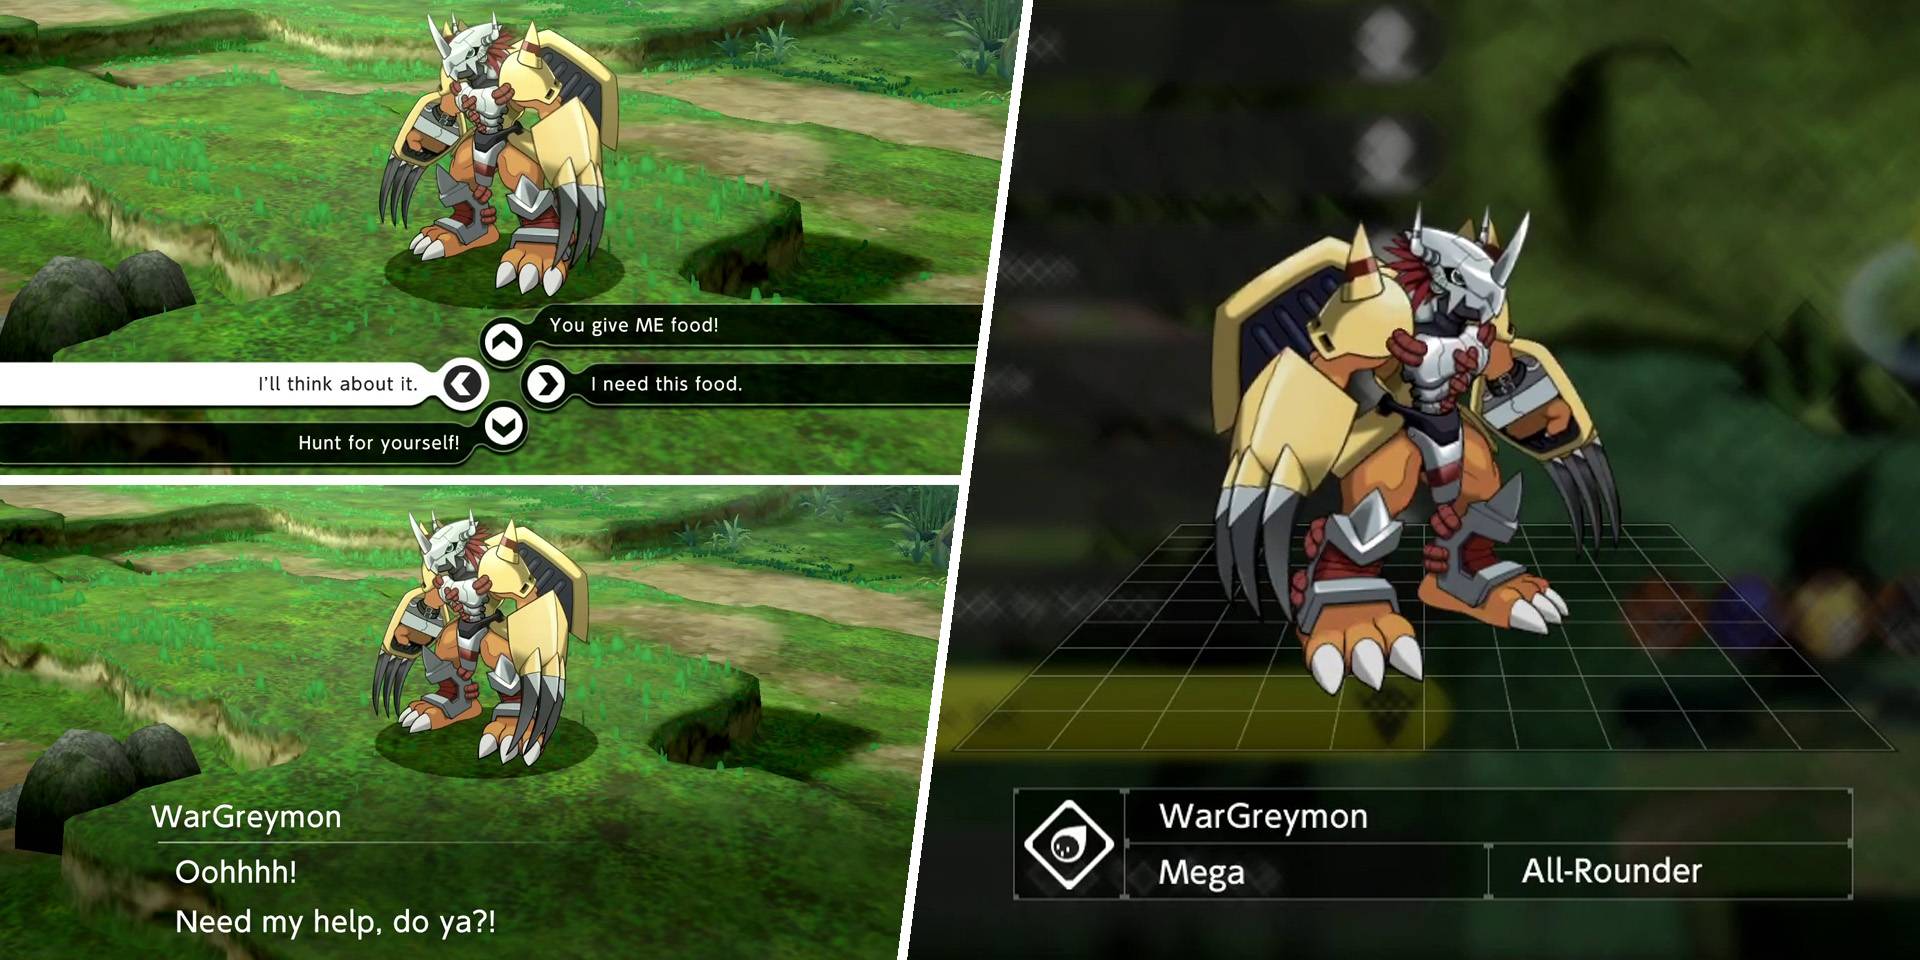 How to get wargreymon in digimon survive